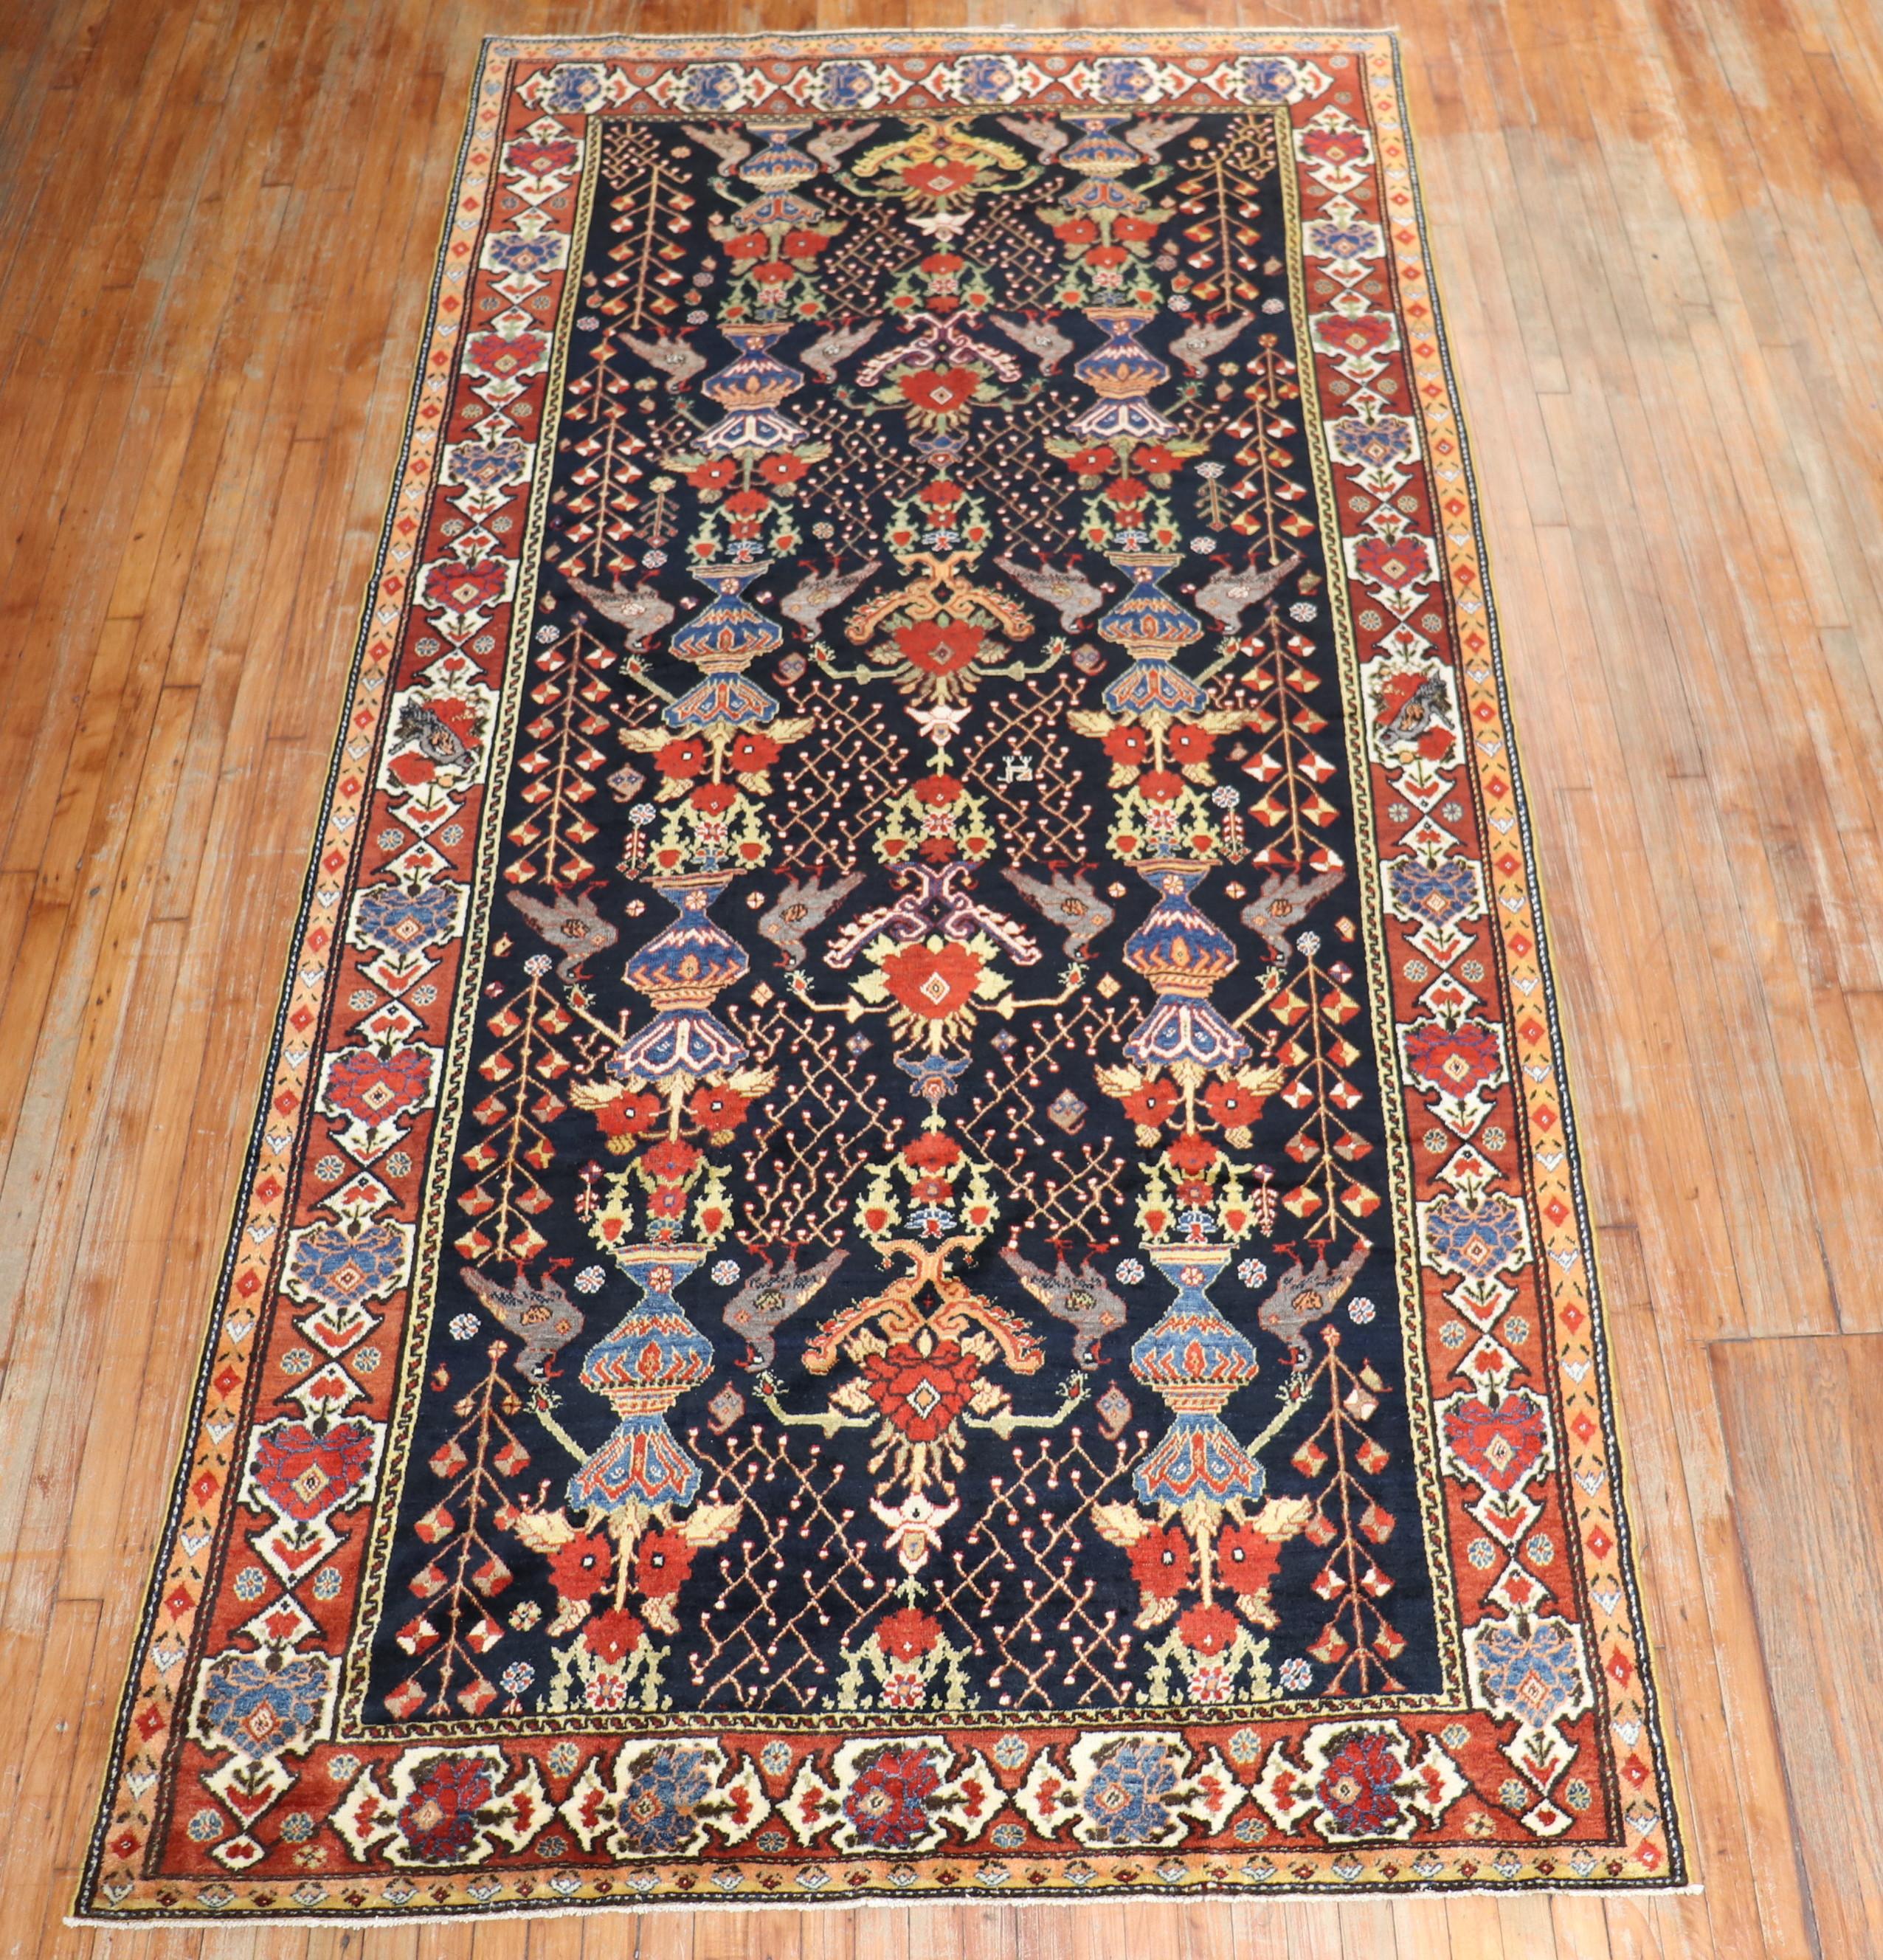 an early 20th century Persian Bakhtiari Gallery size rug

Measures: 5'8'' x 11'4''.